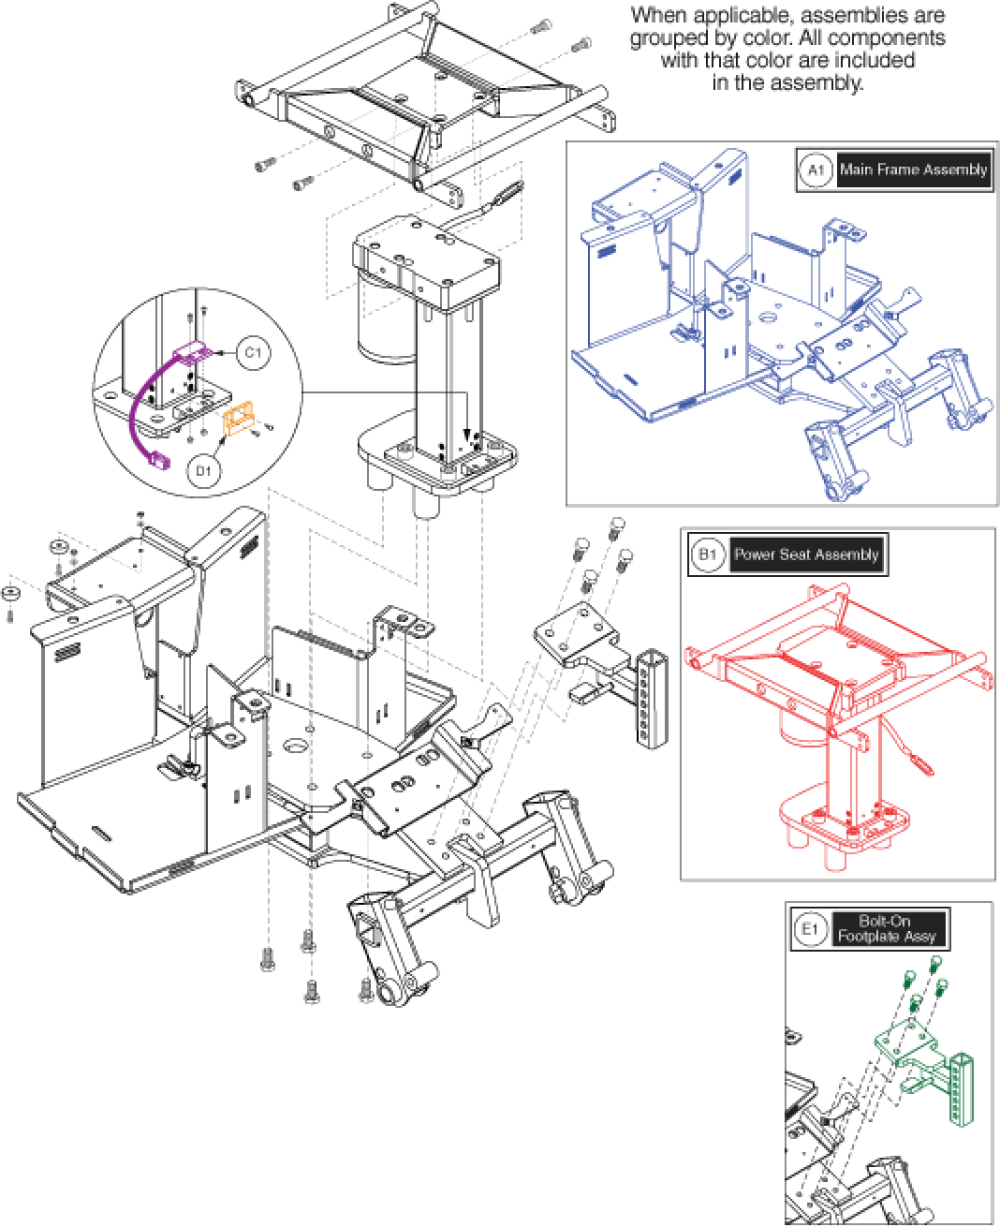 Main Frame Assembly - Jazzy Select 6 2.0 W/ Power Seat parts diagram